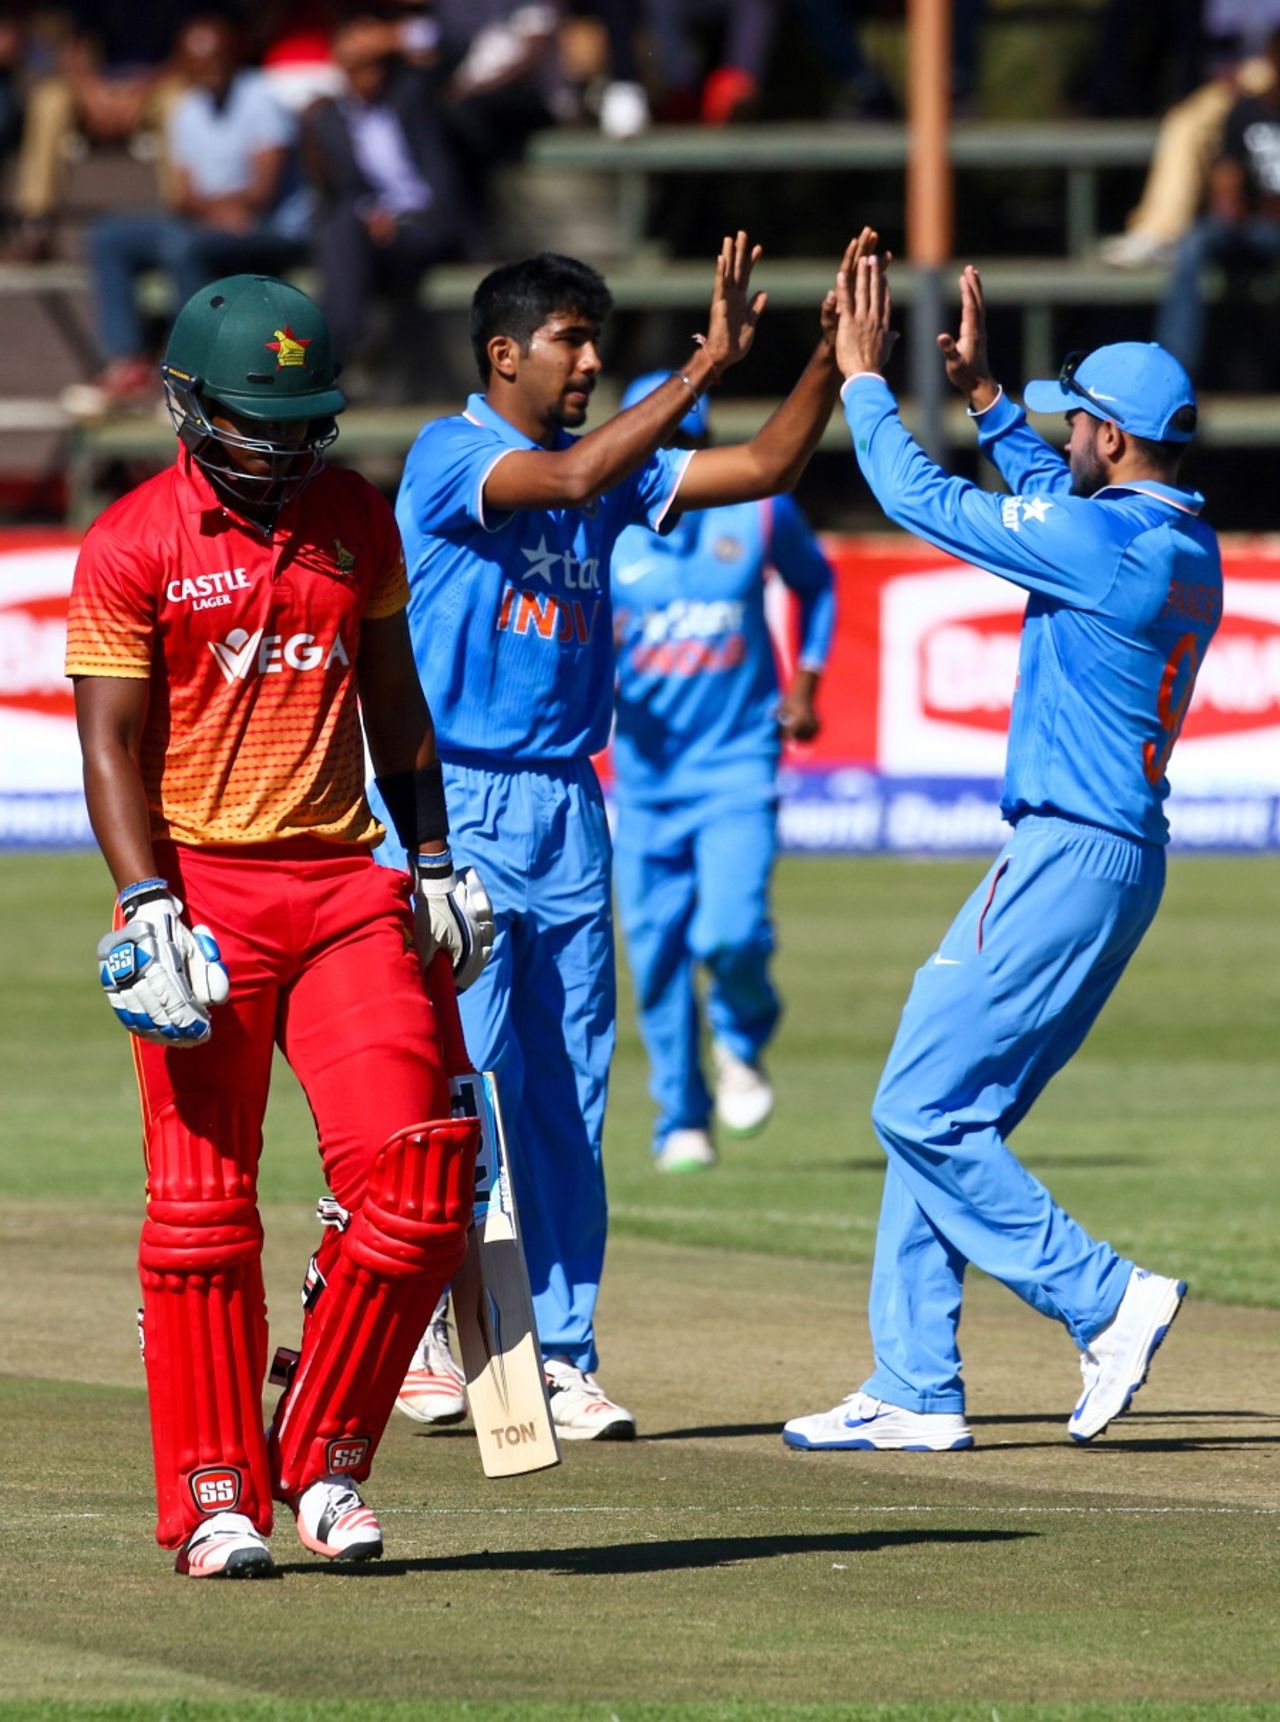 Jasprit Bumrah generated appreciable extra bounce to trouble the hosts, Zimbabwe v India, 1st ODI, Harare, June 11, 2016